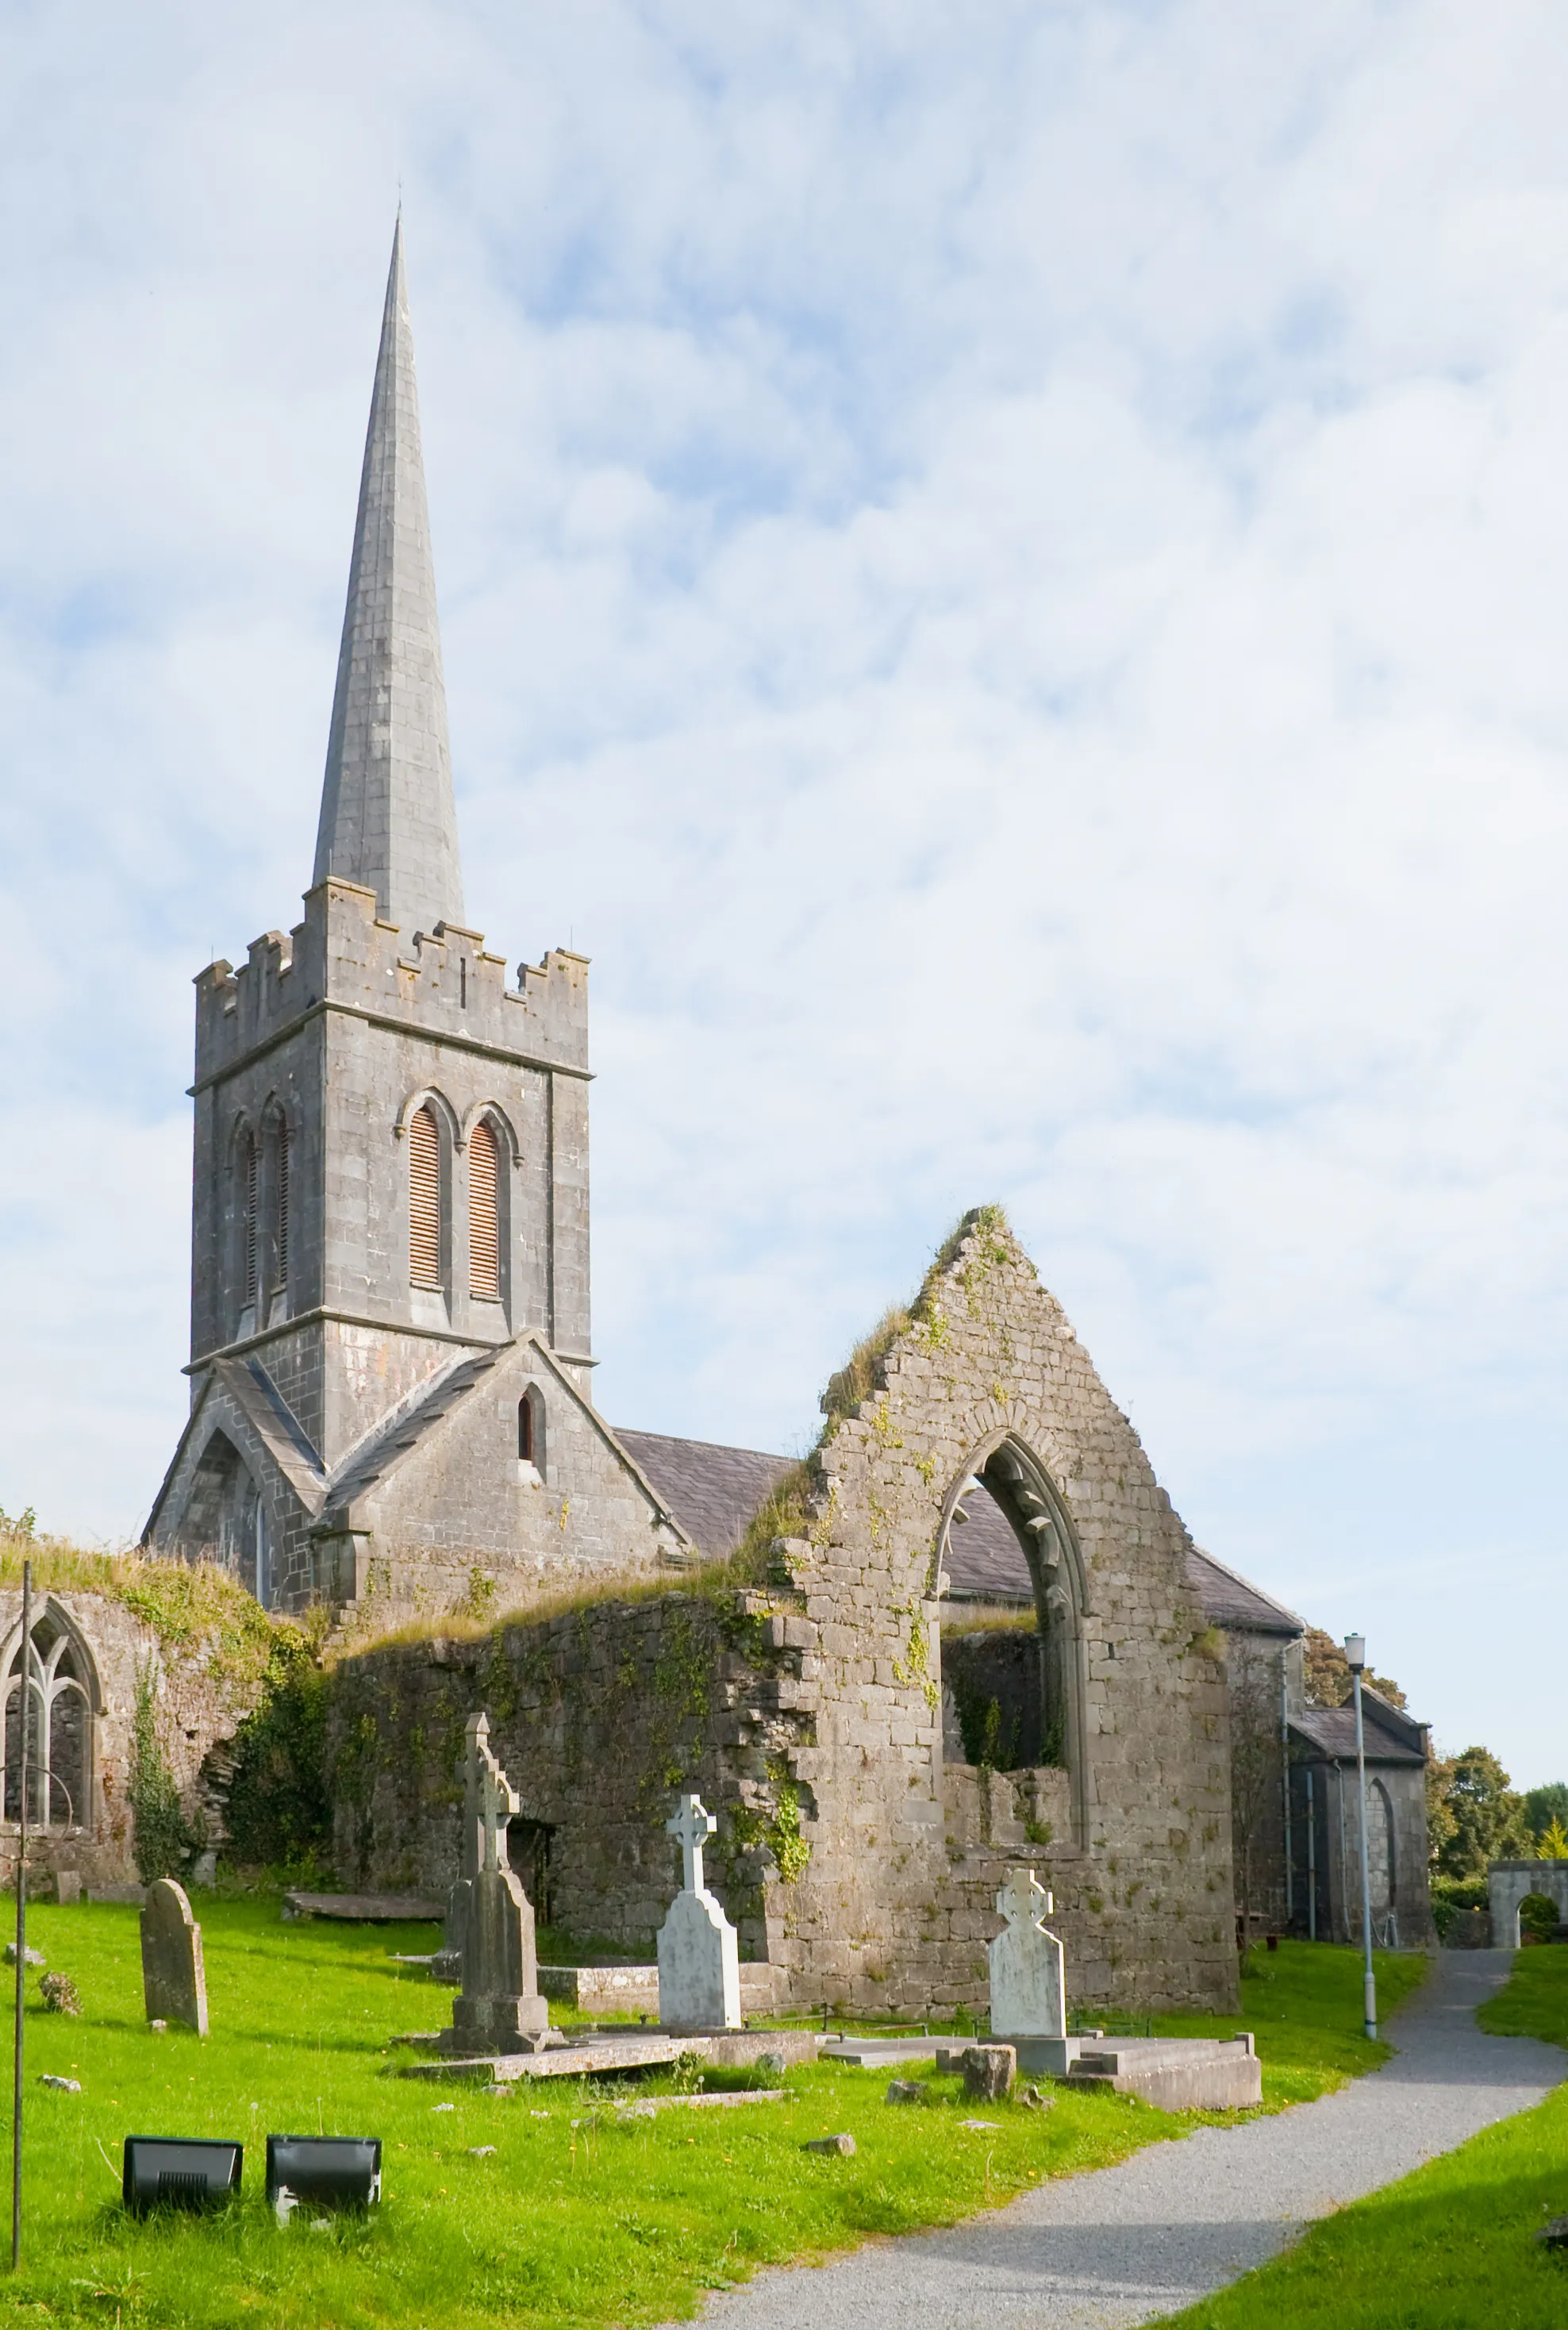 Photo showing: Athenry, County Galway, Ireland

South transept of St. Mary's Parish Church in front of the Protestant church which was built c. 1828 within the ruins.